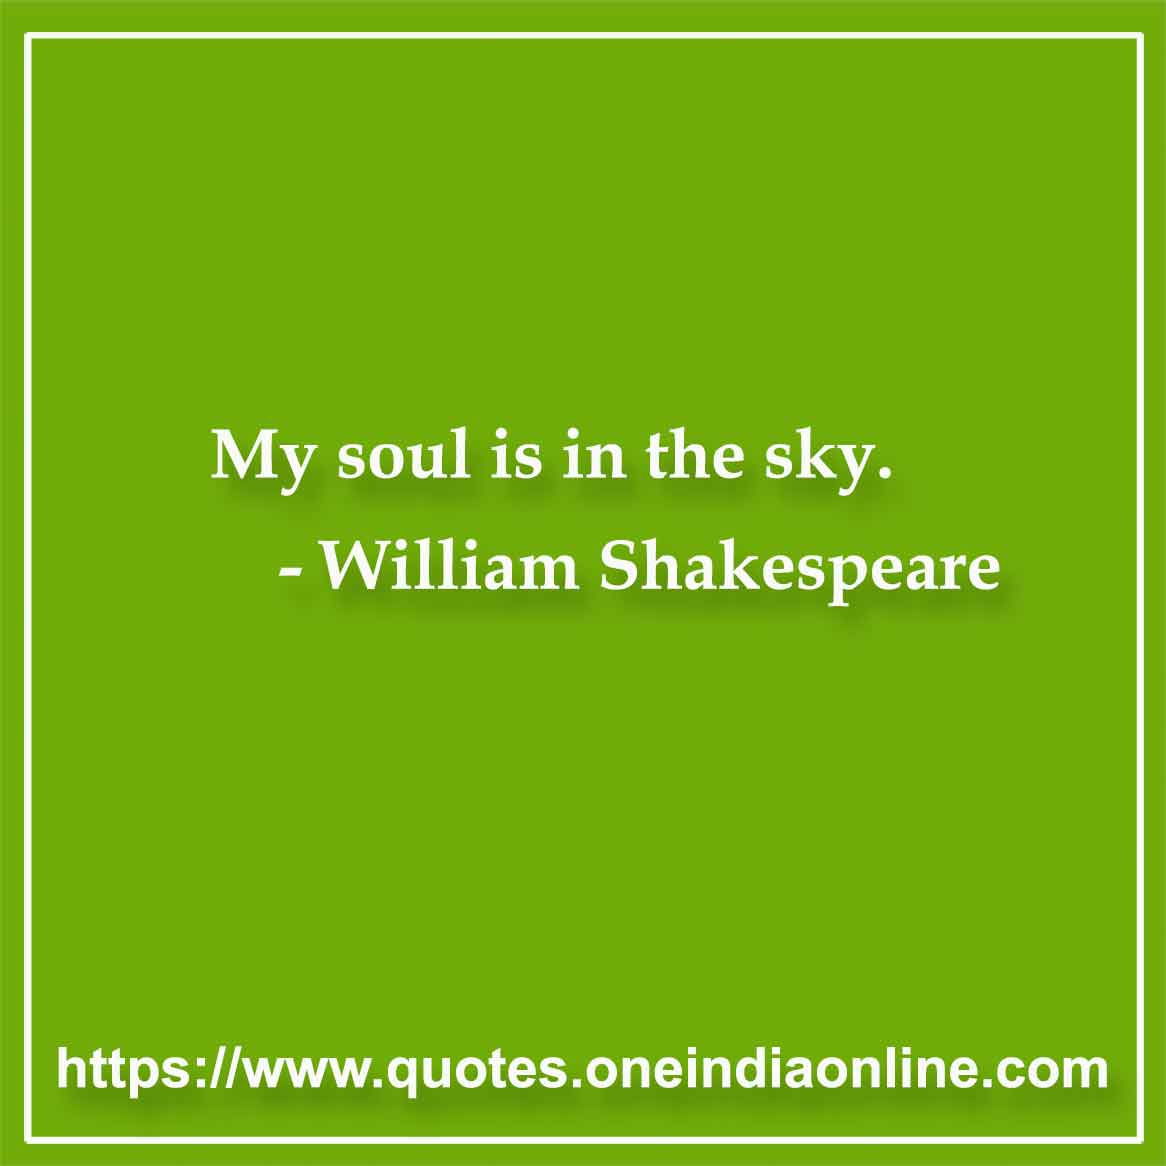 My soul is in the sky.

- William Shakespeare